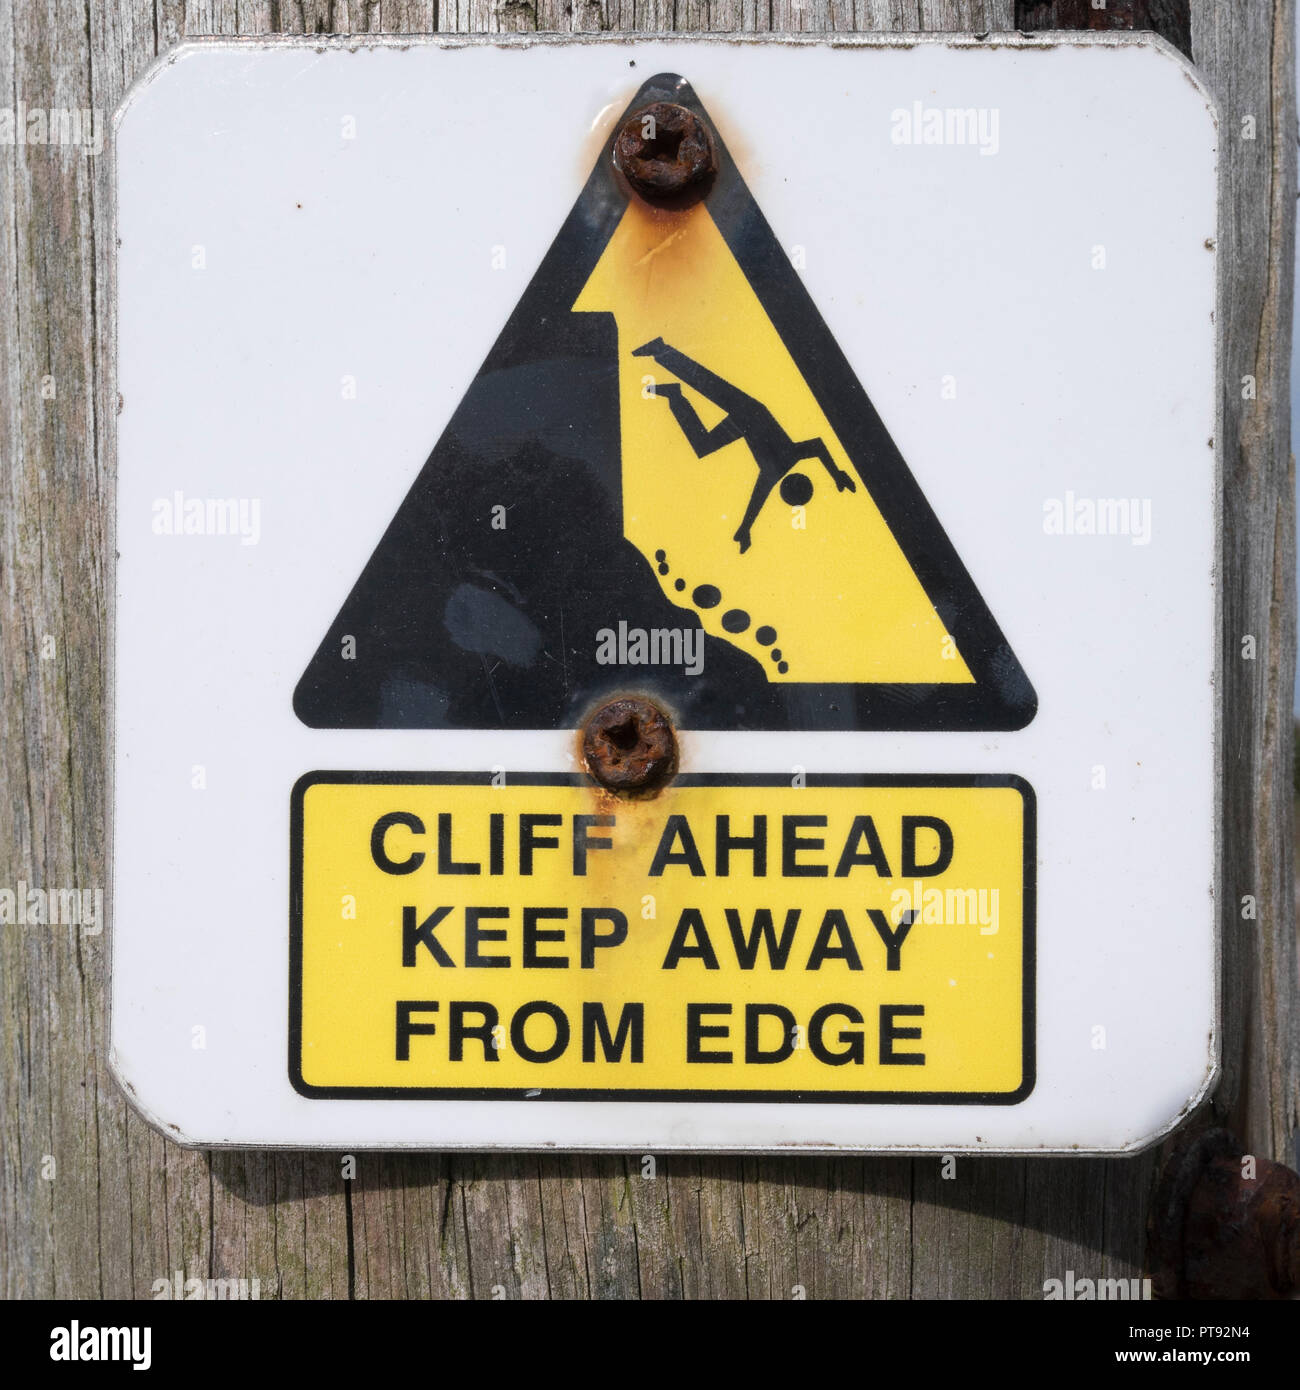 Cliff danger warning sign. Keep away from the cliff edge concept, falling off, falling man pictogram. Stock Photo